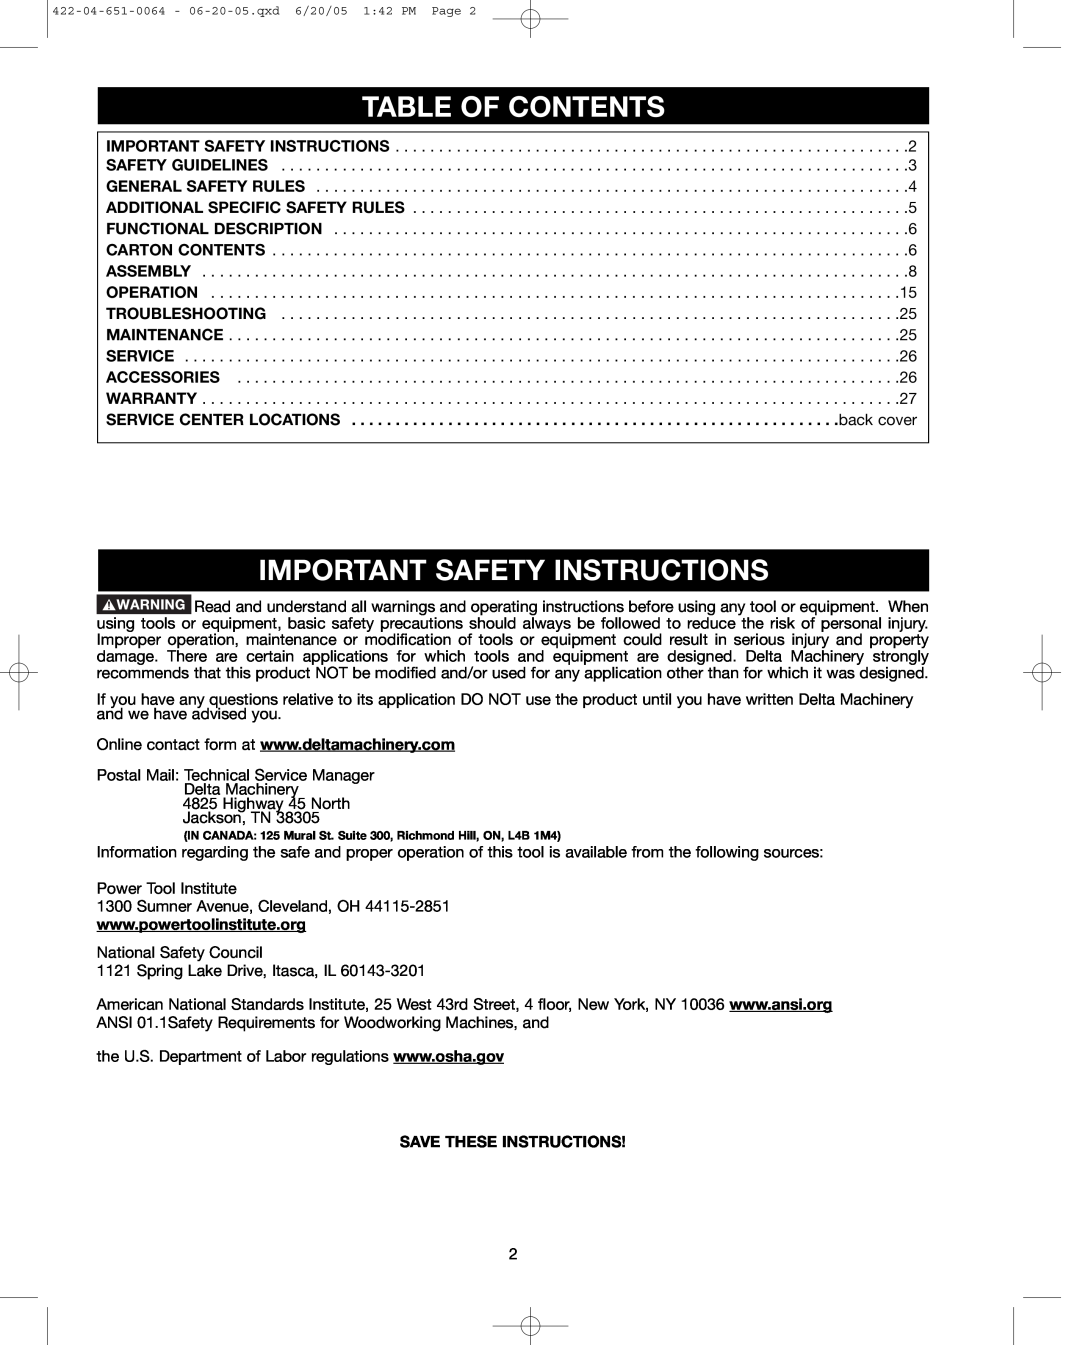 Delta 34-801, 34-814, 34-806 instruction manual Table Of Contents, Important Safety Instructions, Save These Instructions 